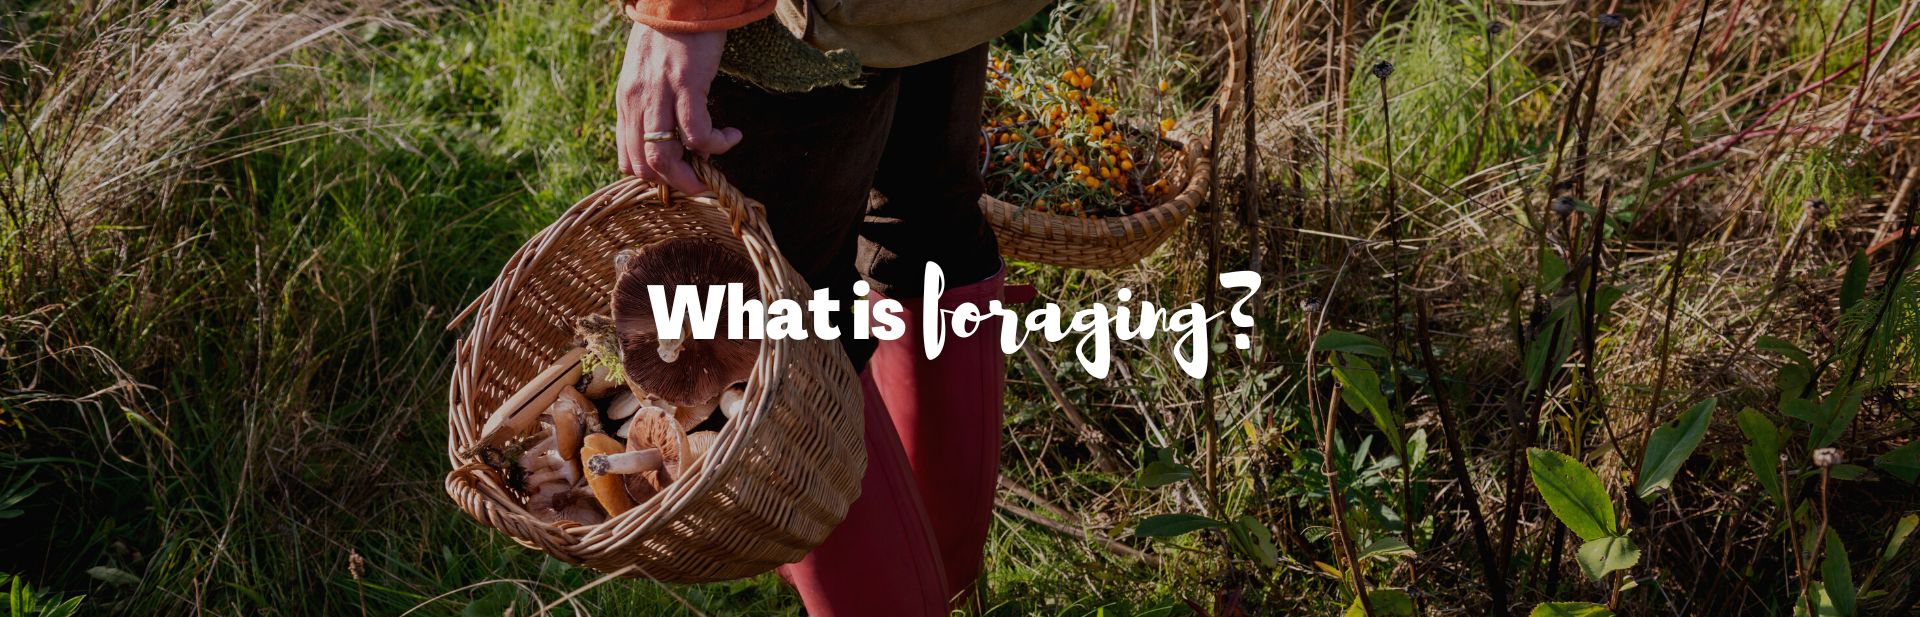 What is Foraging: Art, Science, or Cookery?